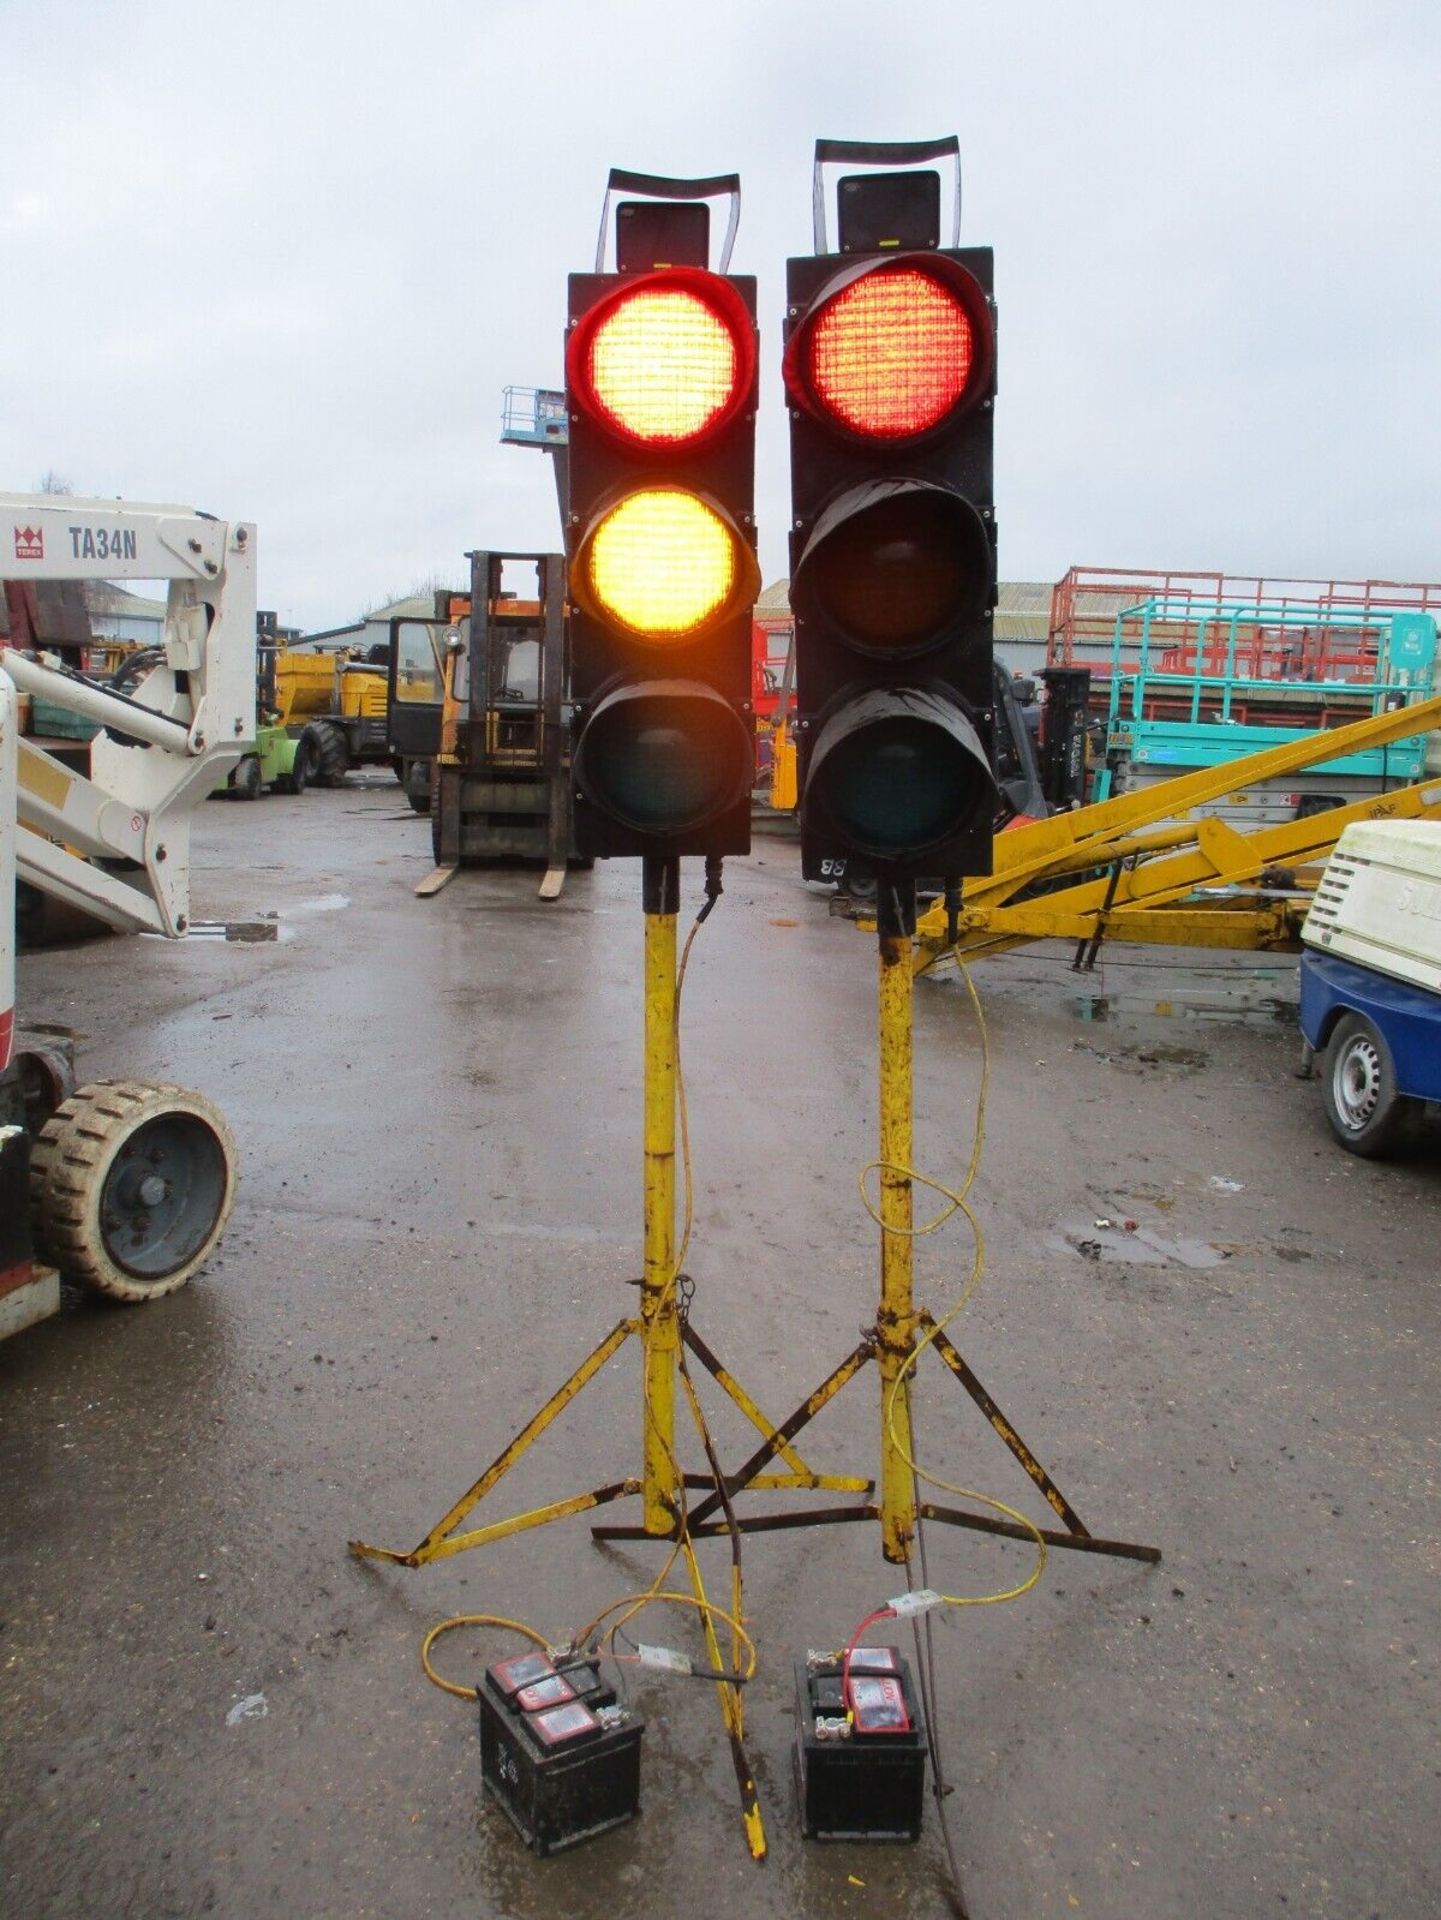 BOOT-SIZED PIKE X LITE: XL 2 TRAFFIC LIGHTS - Image 4 of 5